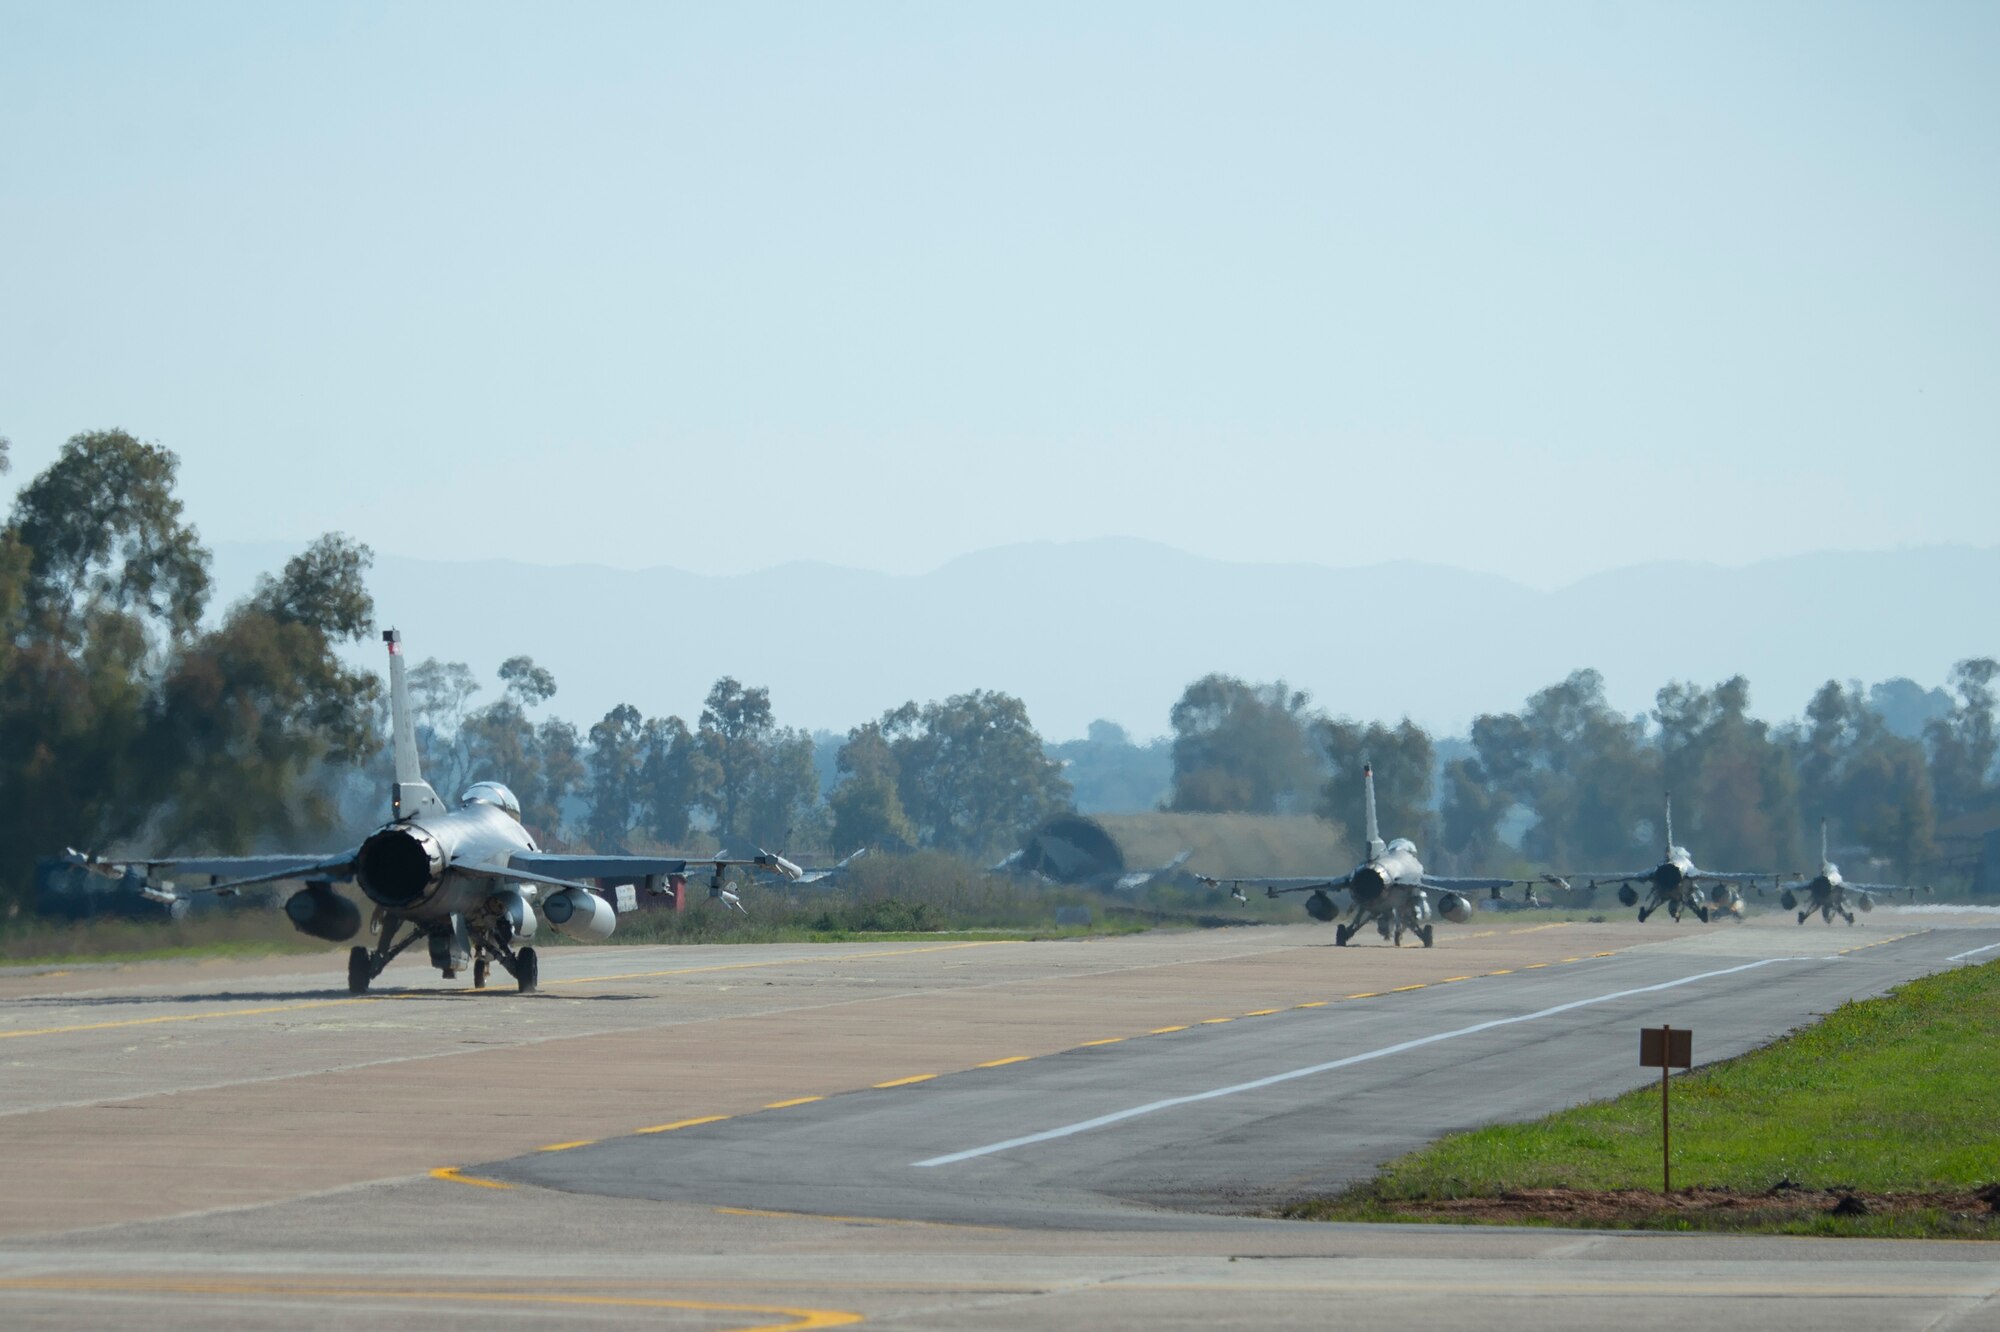 The 480th EFS is participating in INIOHOS 19, which is an annual multinational training exercise held by the Hellenic air force to test multiple nations abilities to integrate and work together to respond to a variety of scenarios in a timely manner